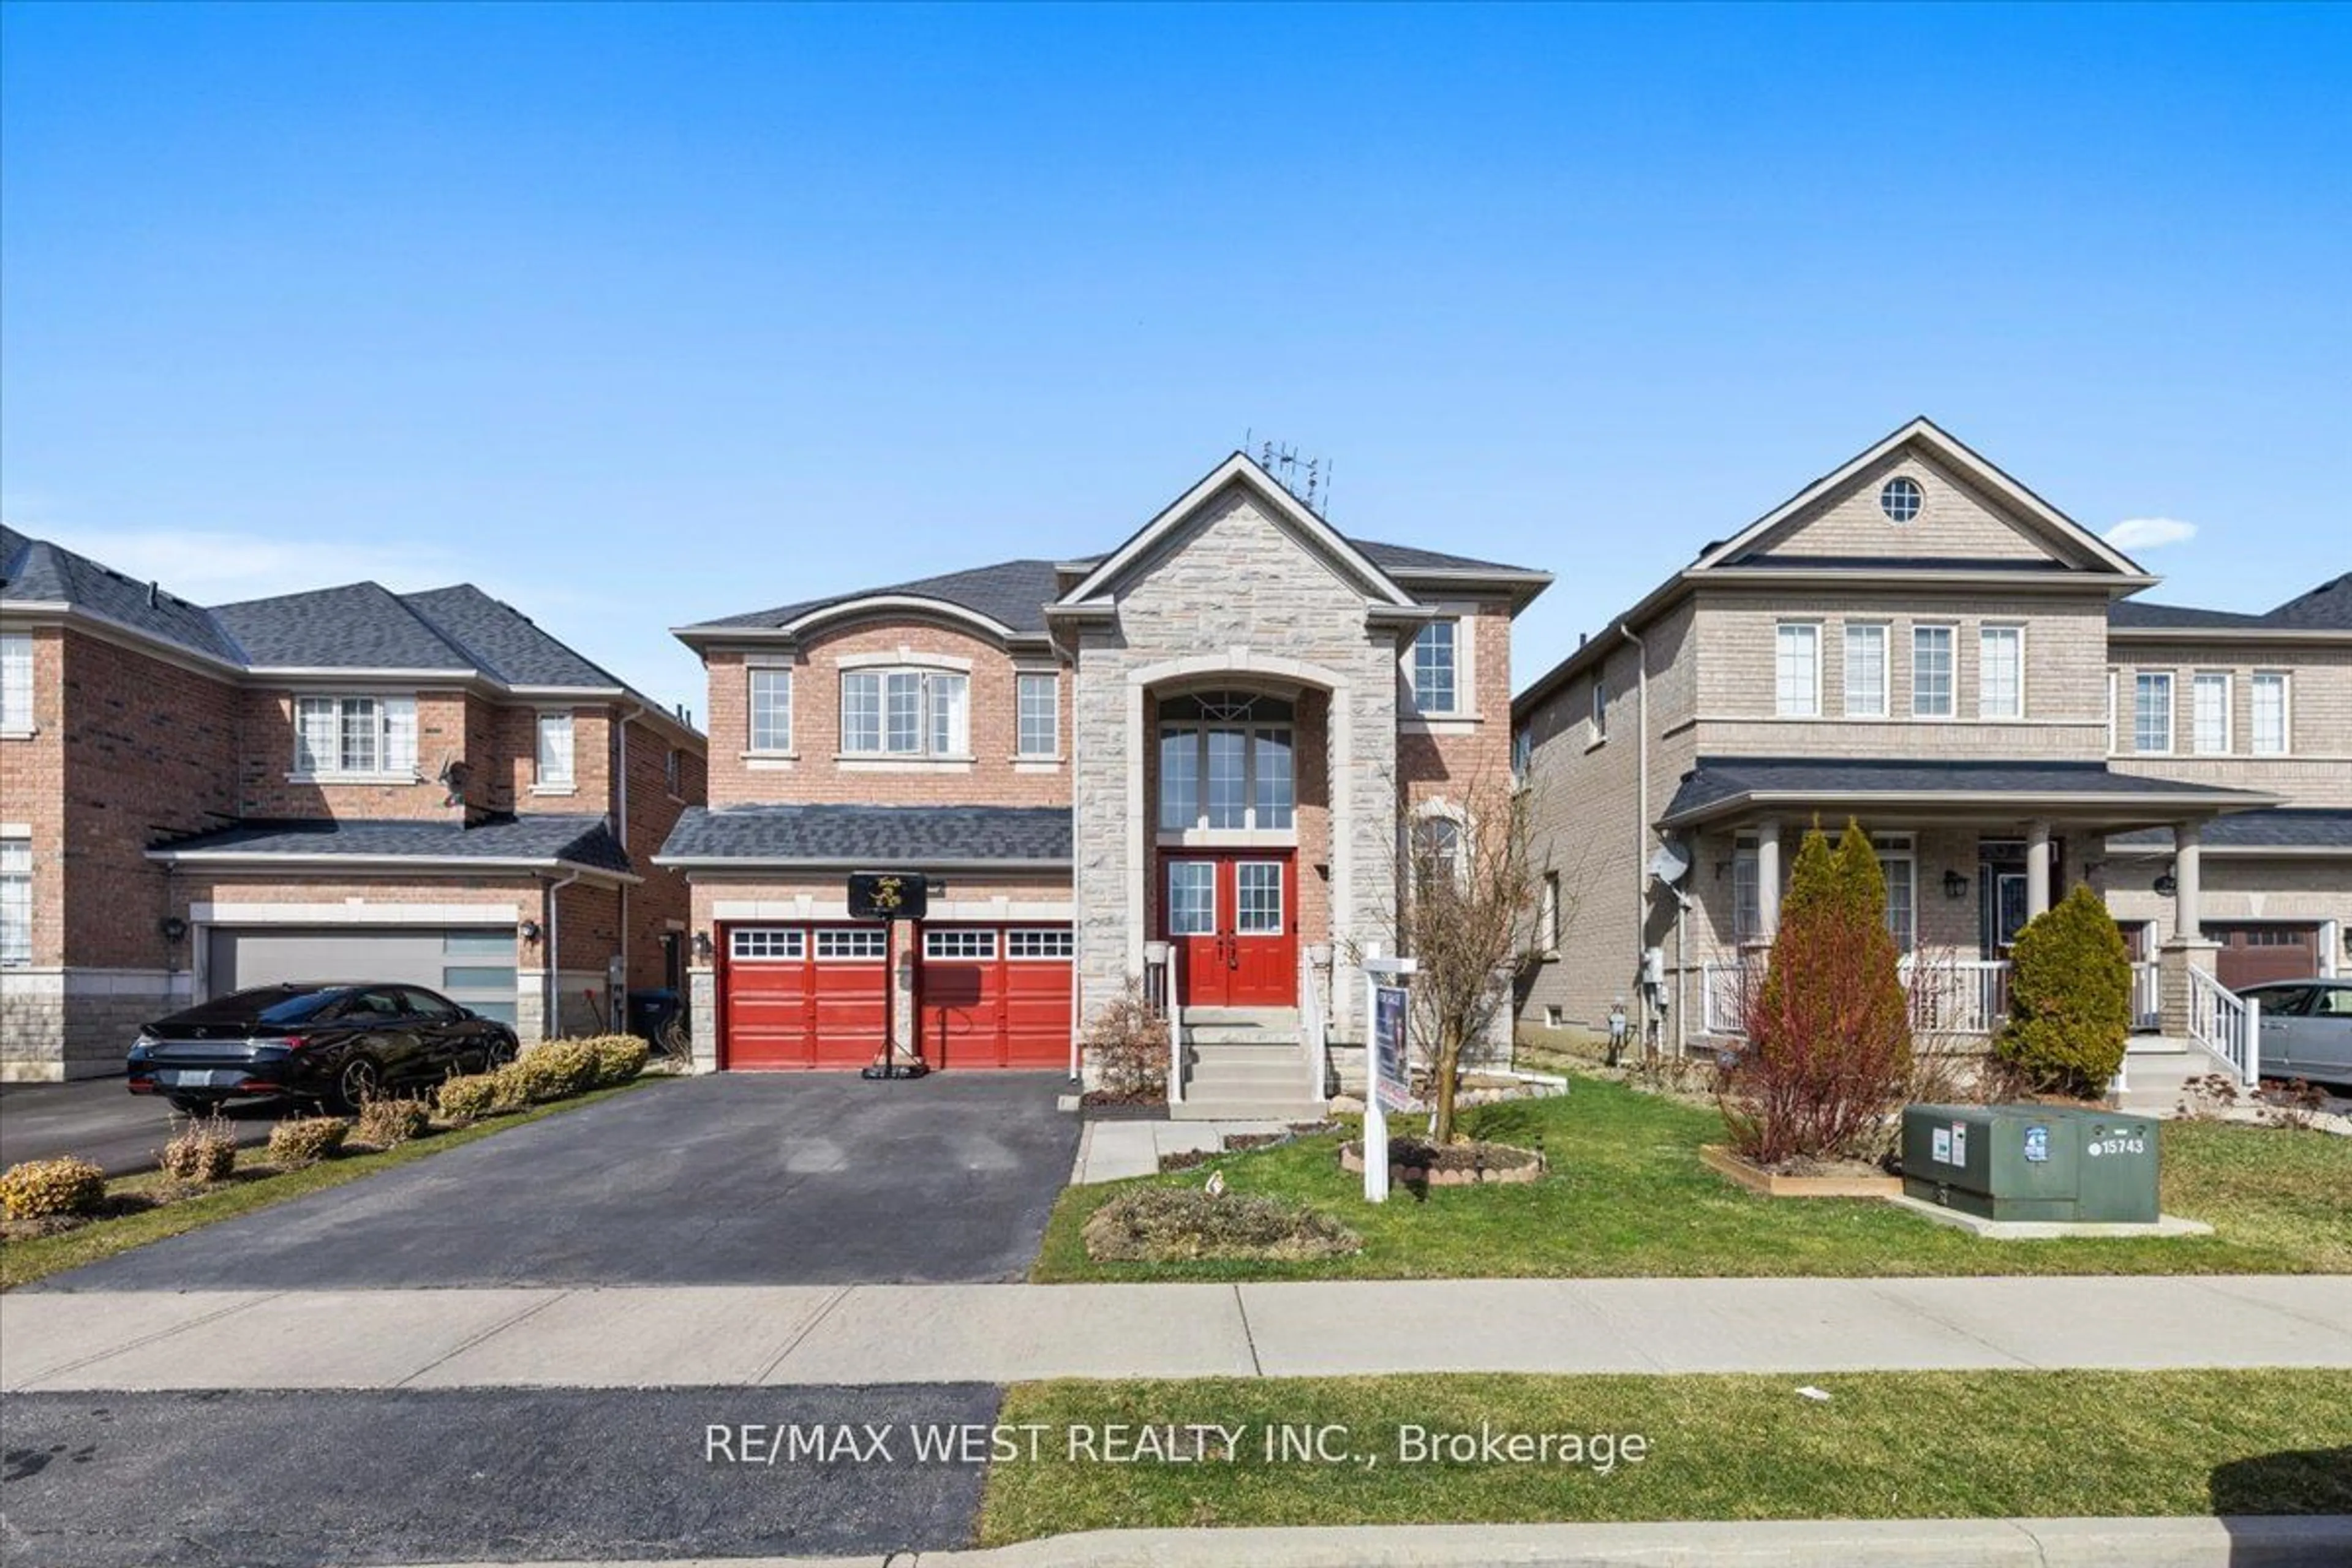 Frontside or backside of a home for 36 Lexington Rd, Brampton Ontario L6P 2B6